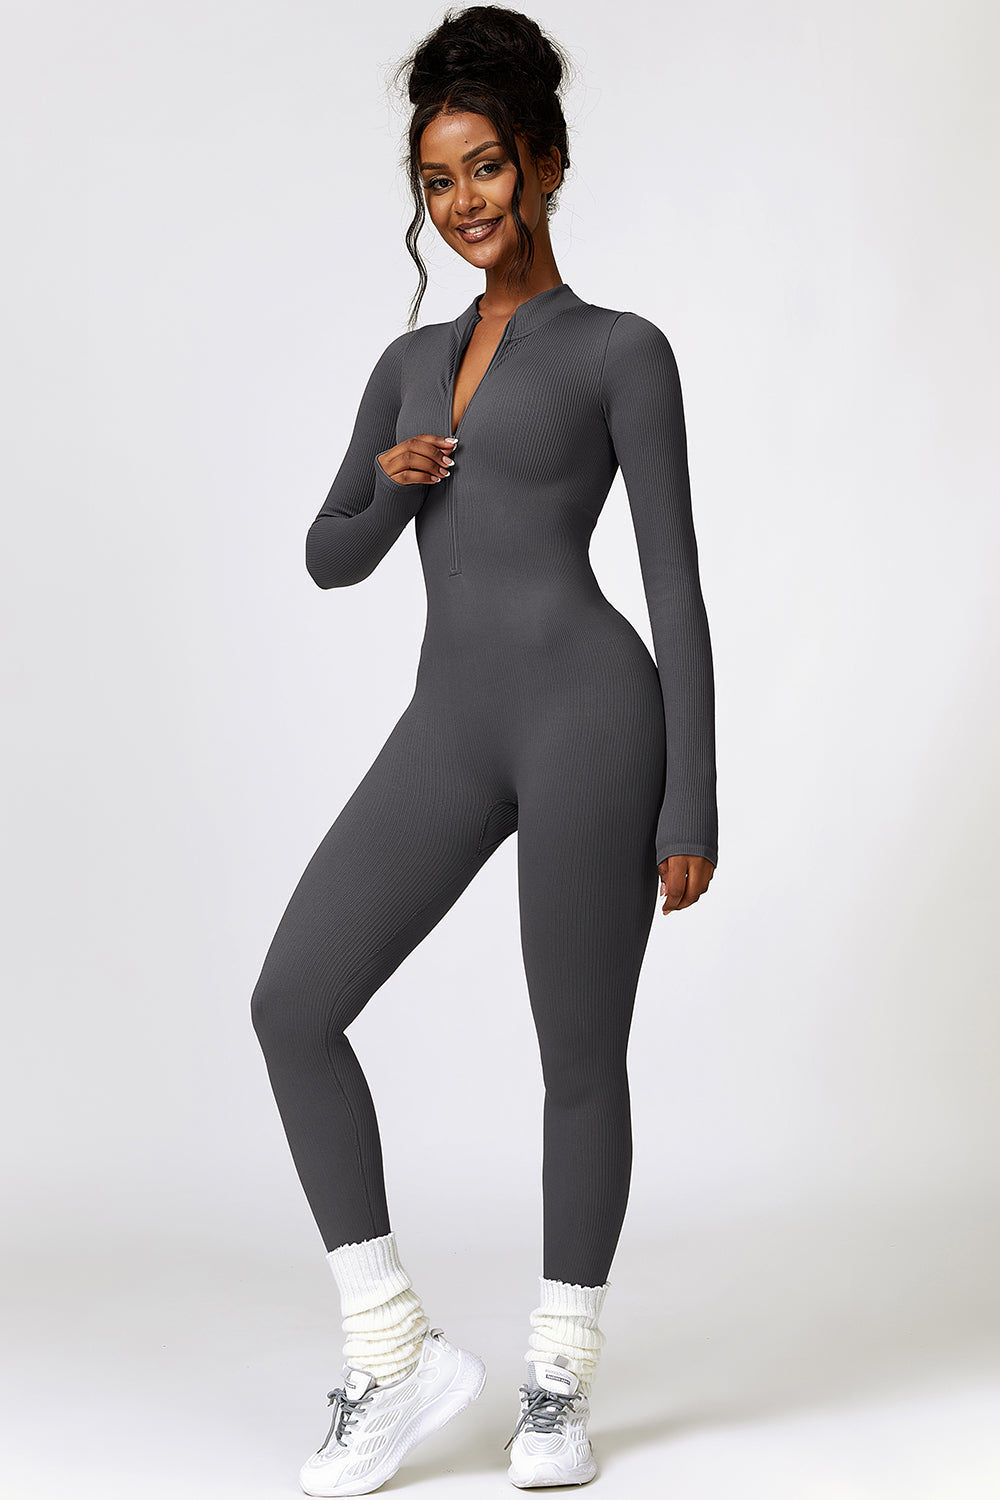 a woman in a grey bodysuit posing for a picture